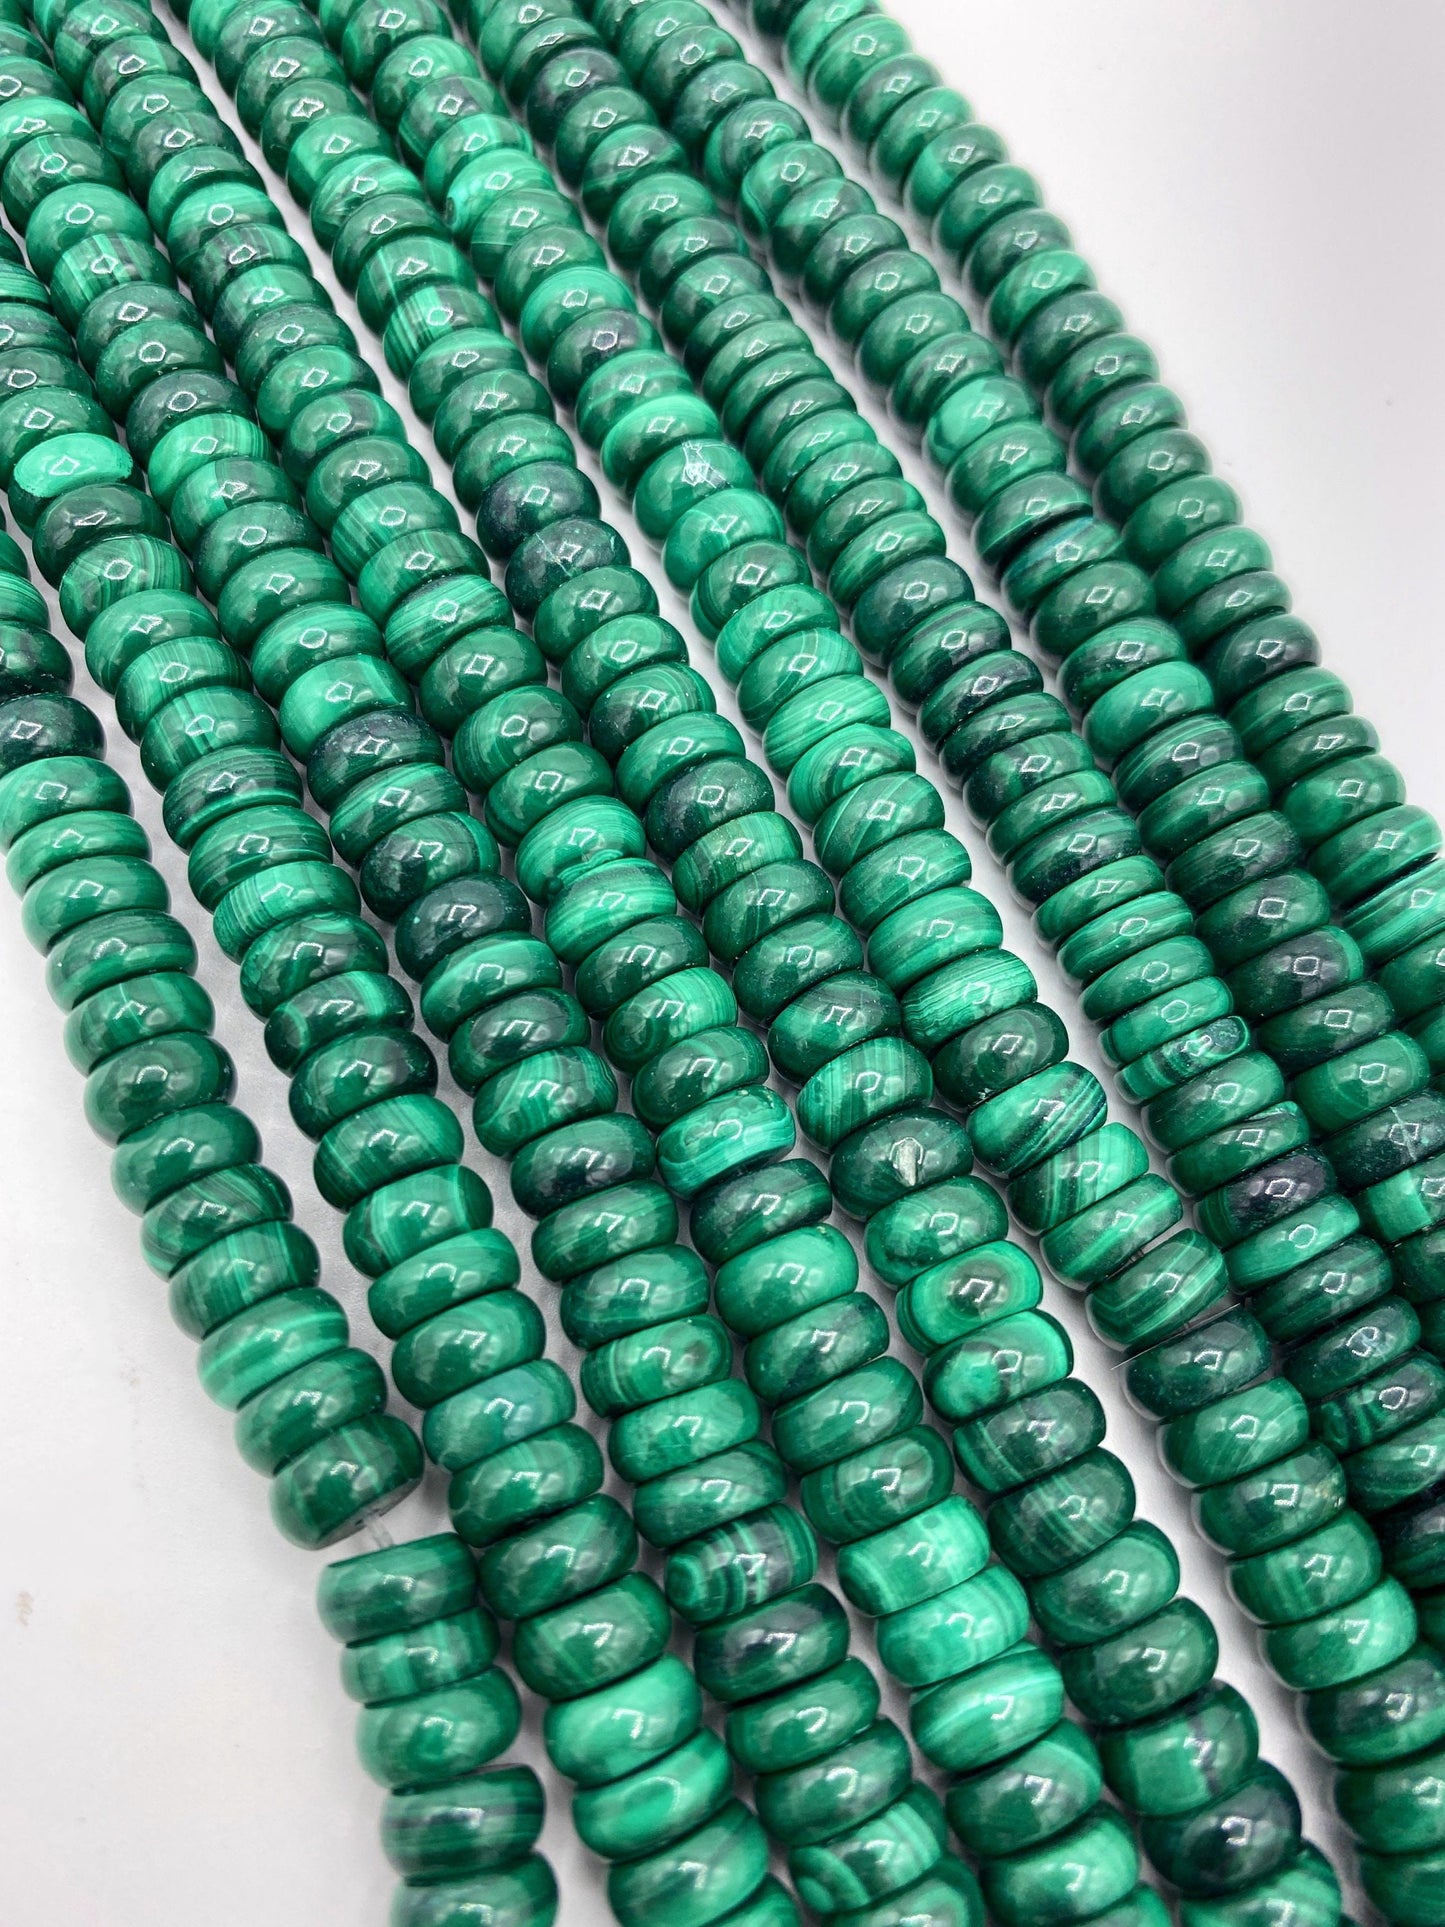 AAA Natural Malachite Gemstone Bead 5x10mm Rondelle Shape, Gorgeous Natural Green Color Malachite Gemstone Bead, High Quality Beads